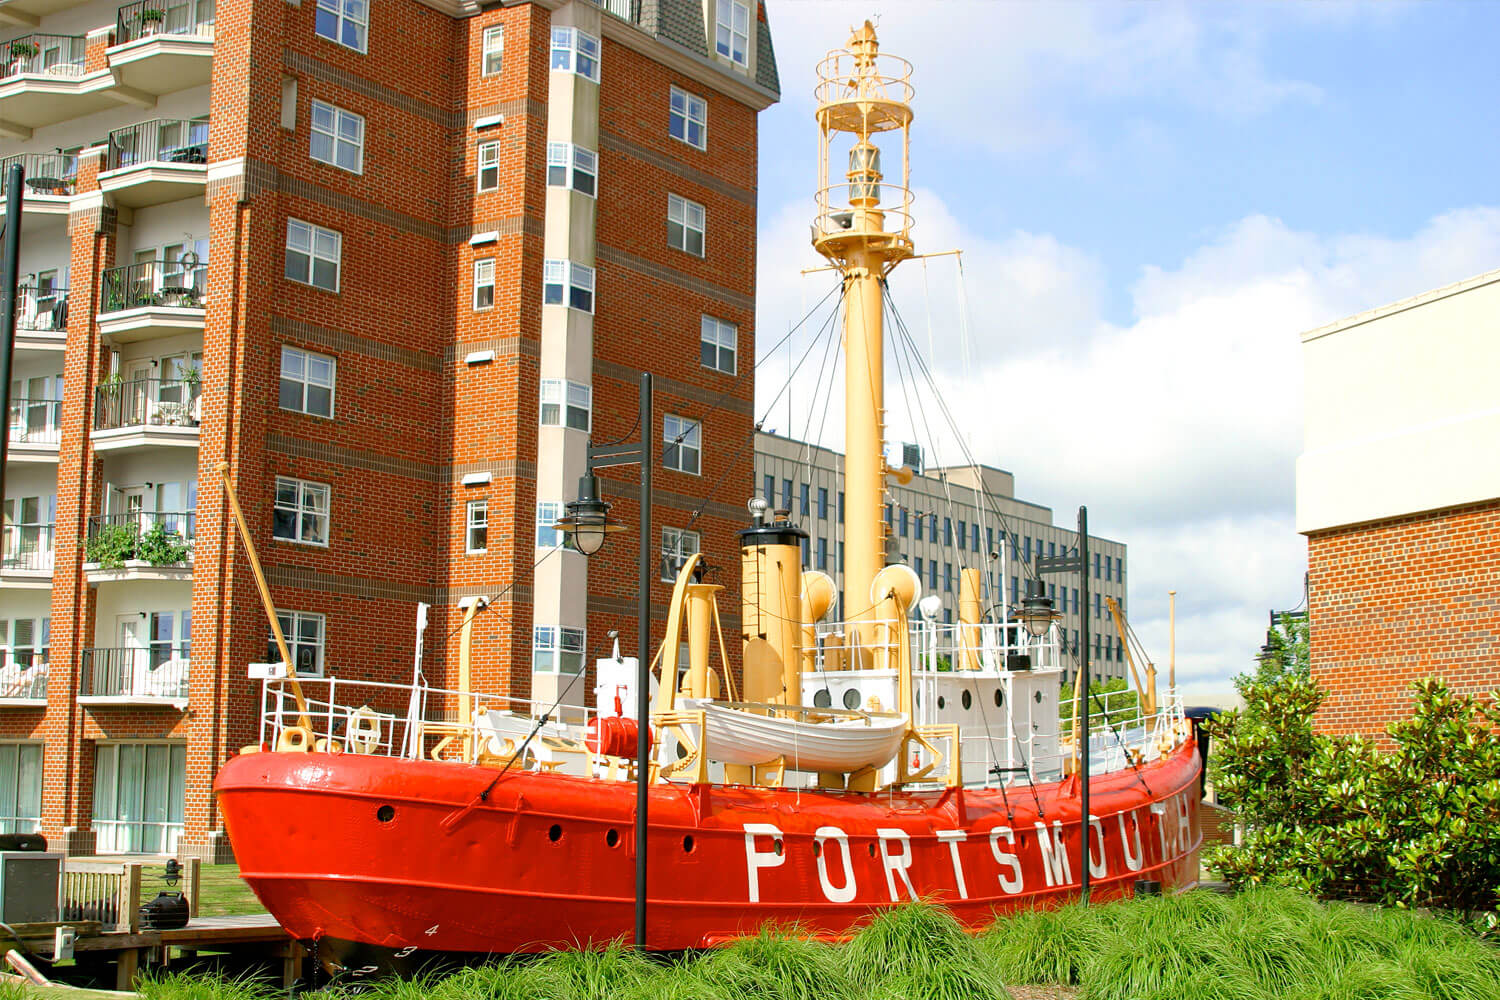 The Portsmouth Lightship Museum